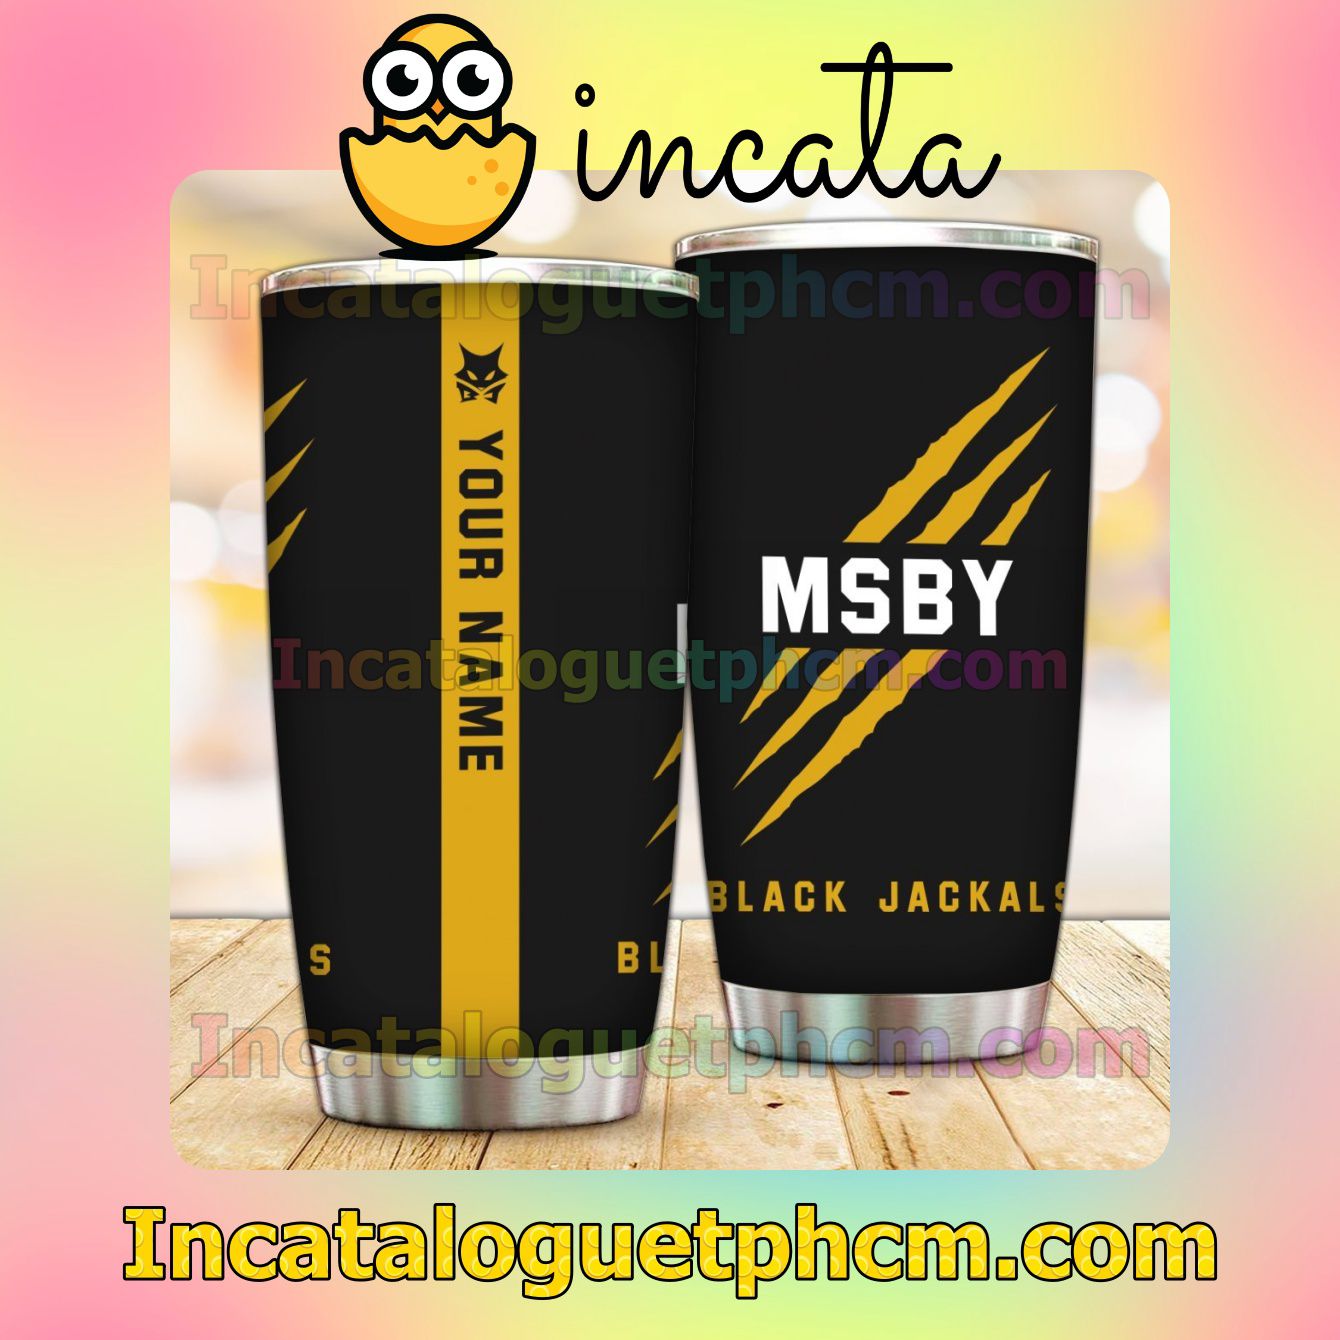 Personalized Msby Black Jackals Tumbler Design Gift For Mom Sister